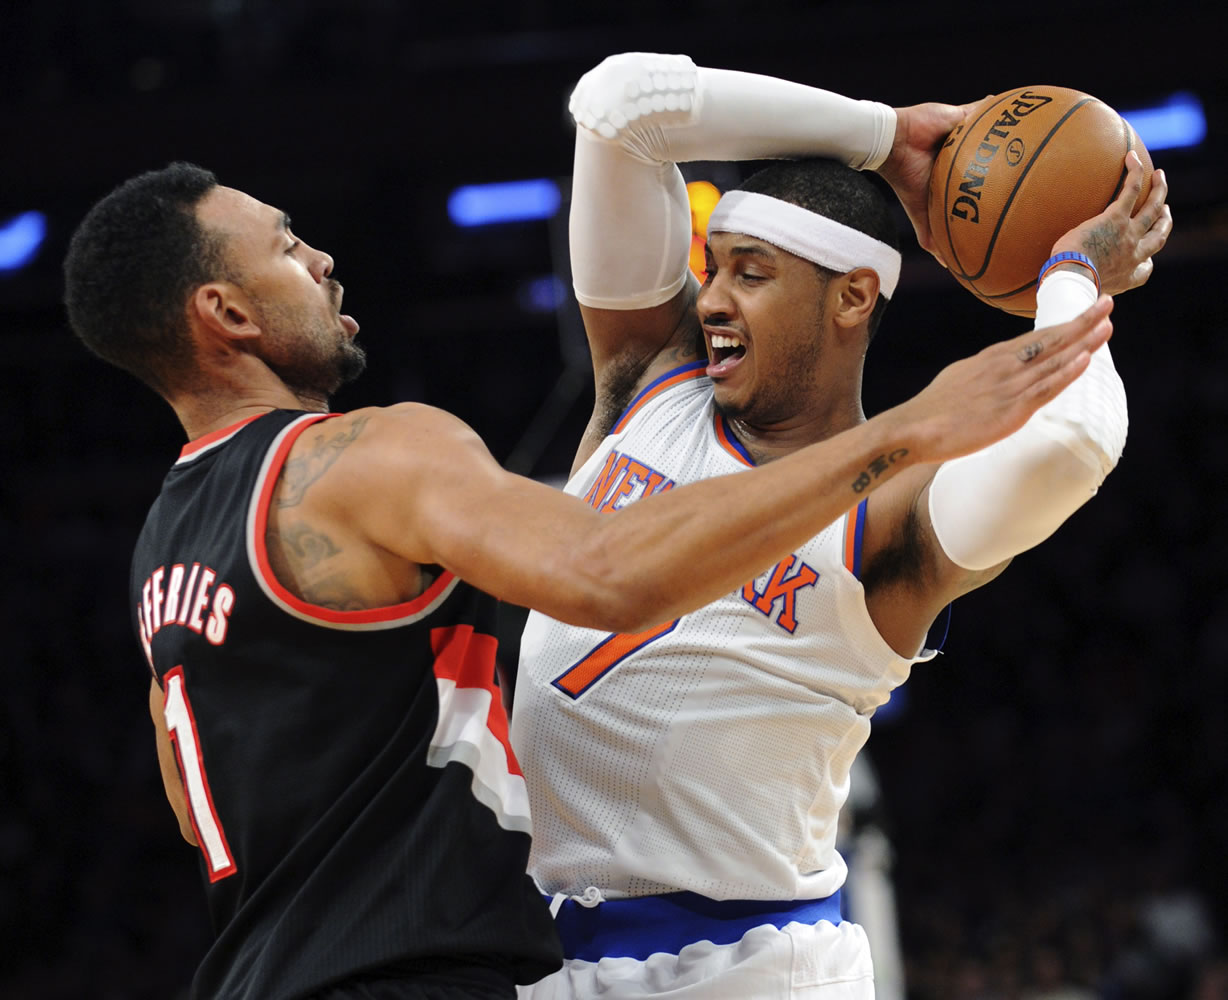 New York Knicks' Carmelo Anthony, right, is pressured by Portland Trail Blazers' Jared Jeffries during the second quarter Tuesday.